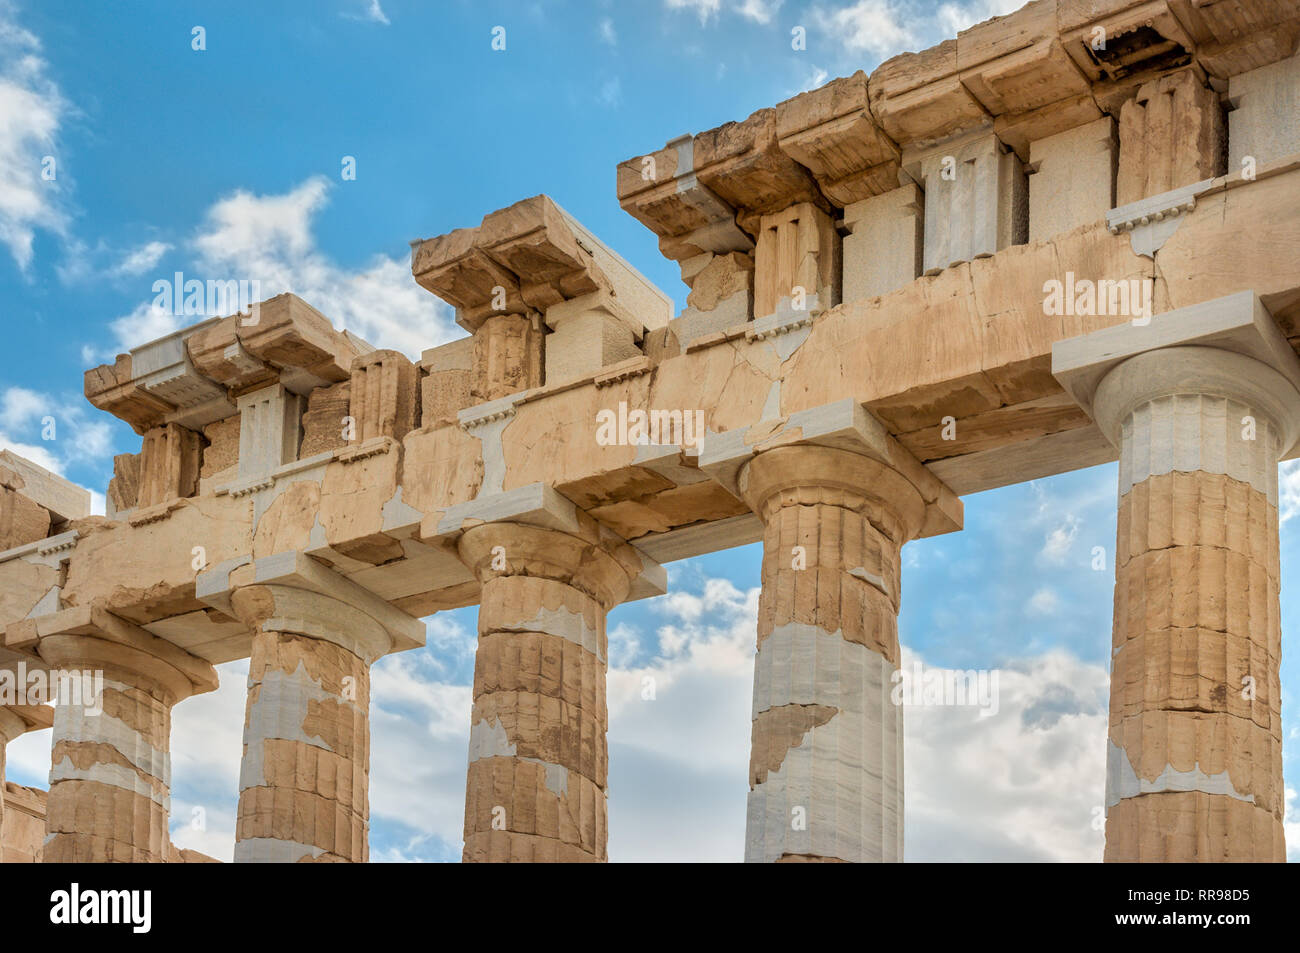 Fragment of the Parthenon, an archaic temple located on the Acropolis of Athens, built in 438 BC in Athens, Greece Stock Photo